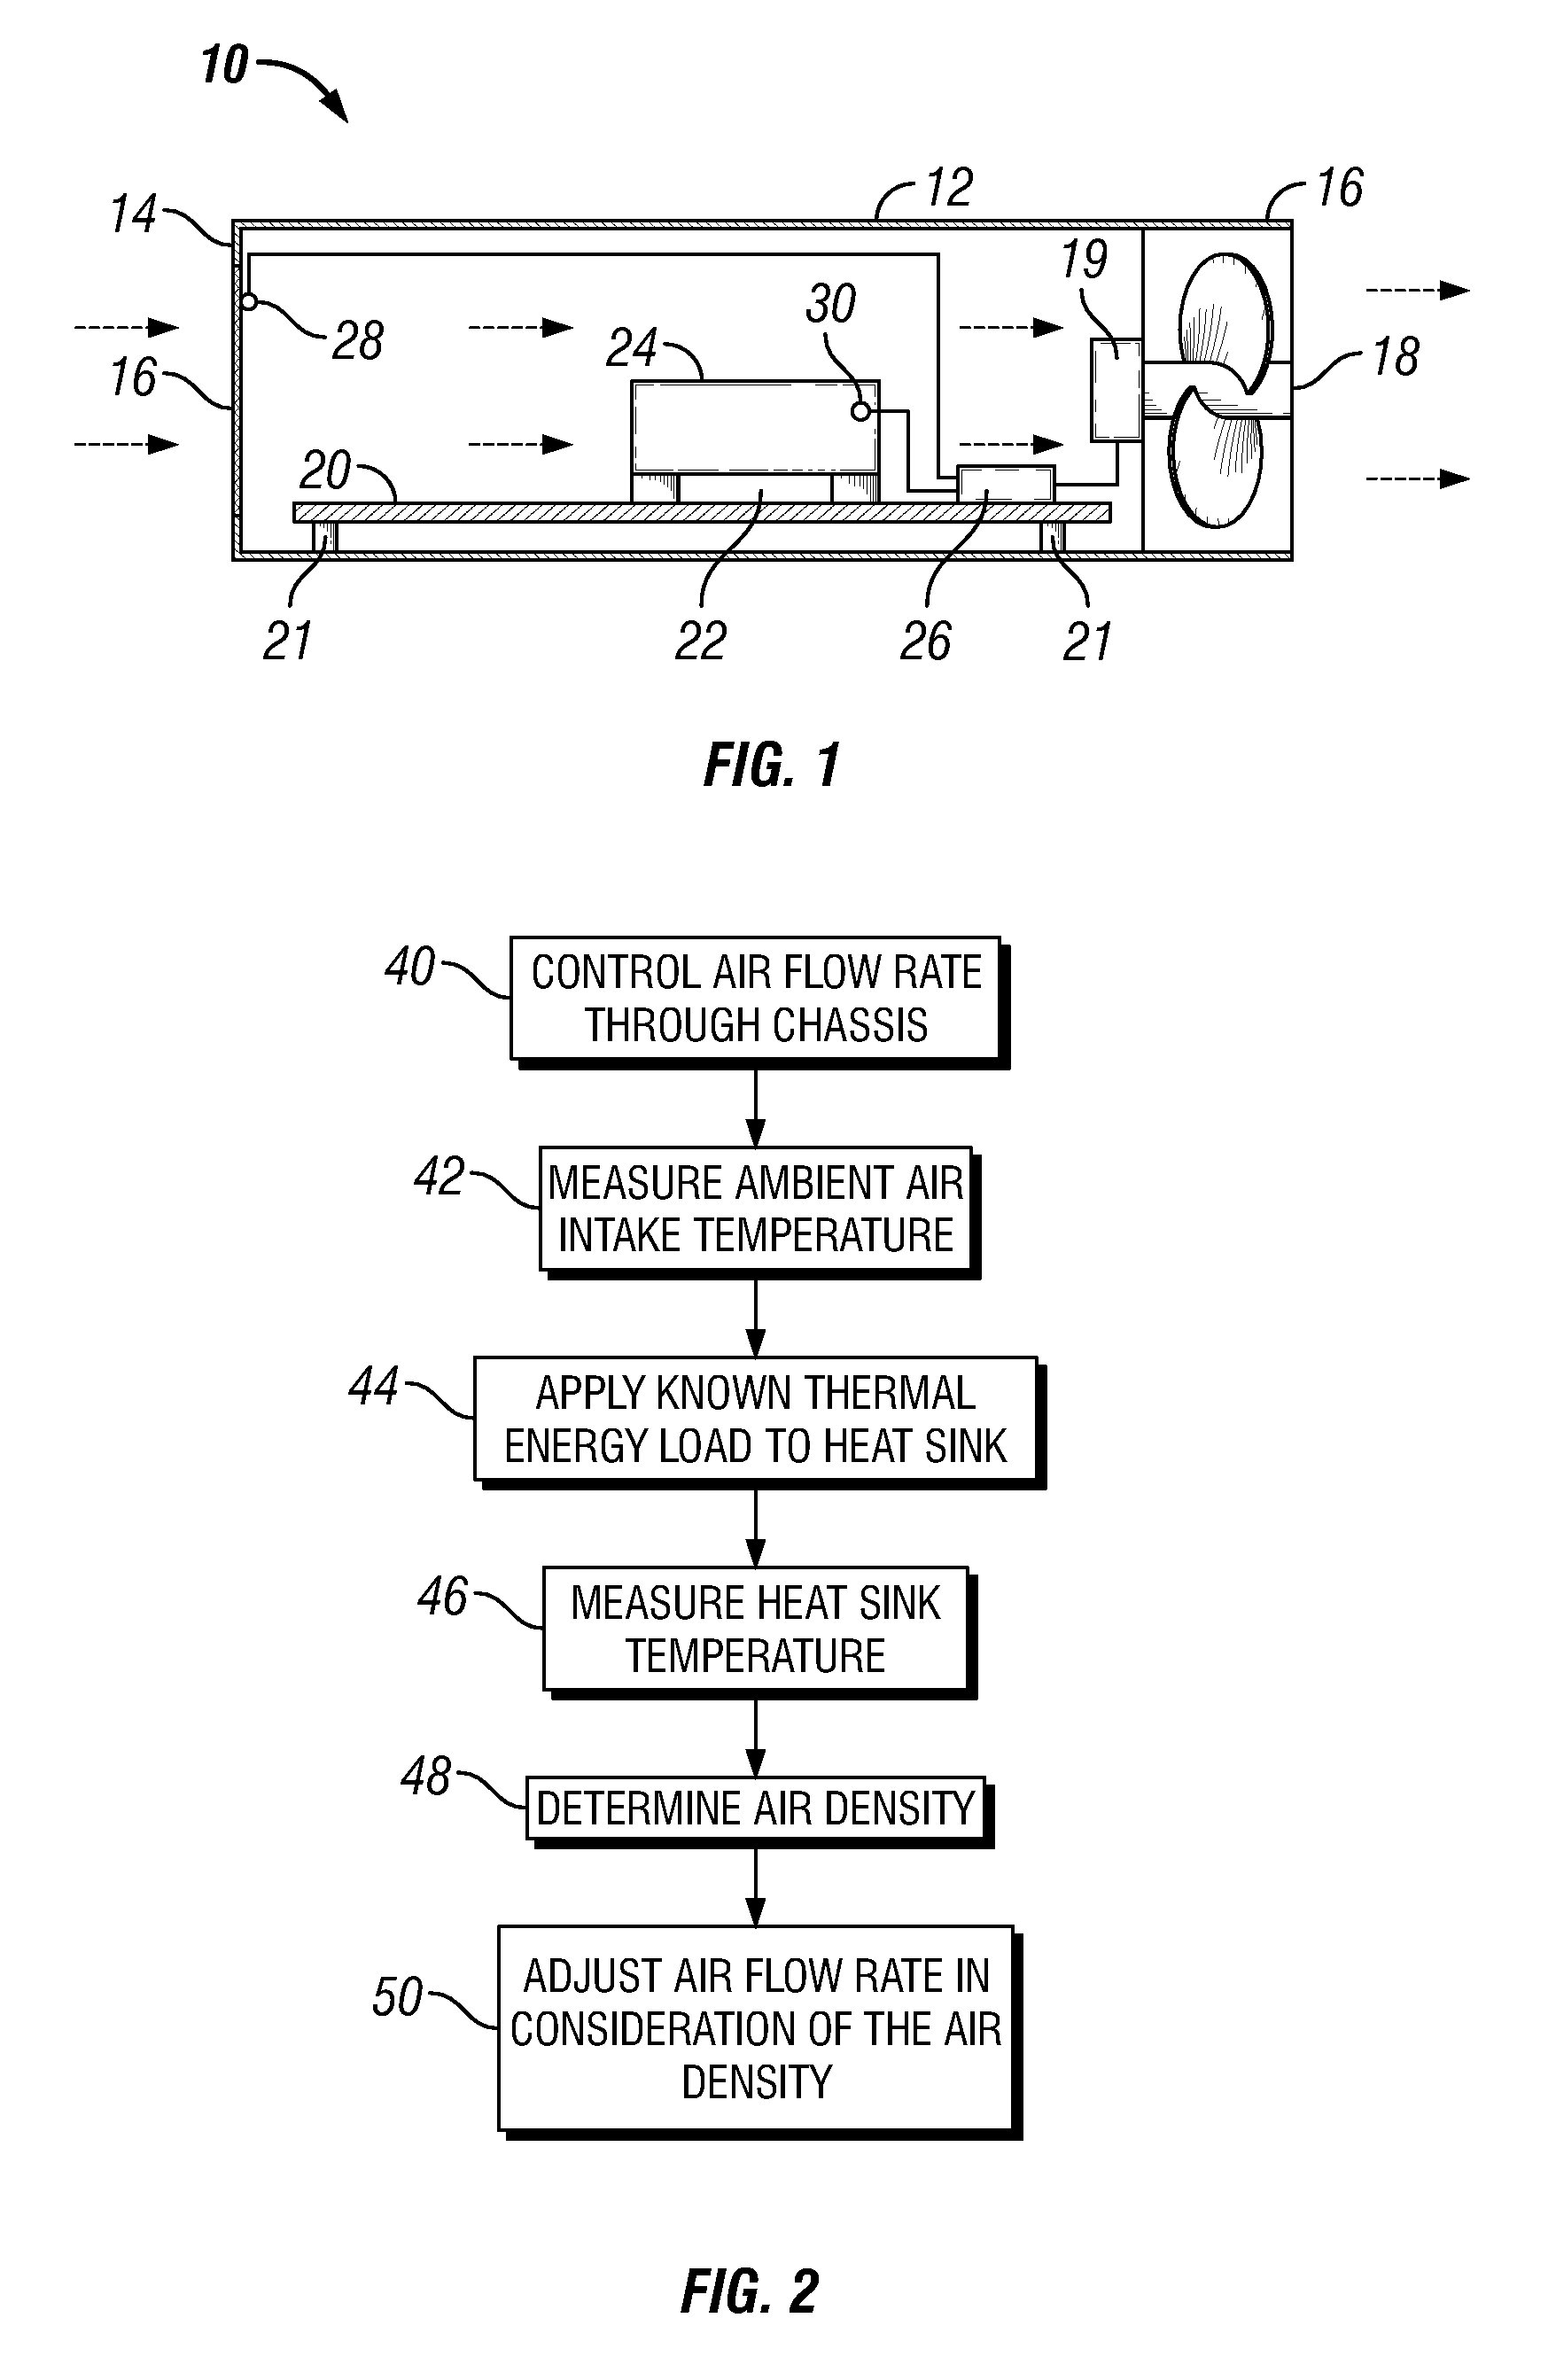 System and Method for Determining Air Density Based on Temperature Sensor Data